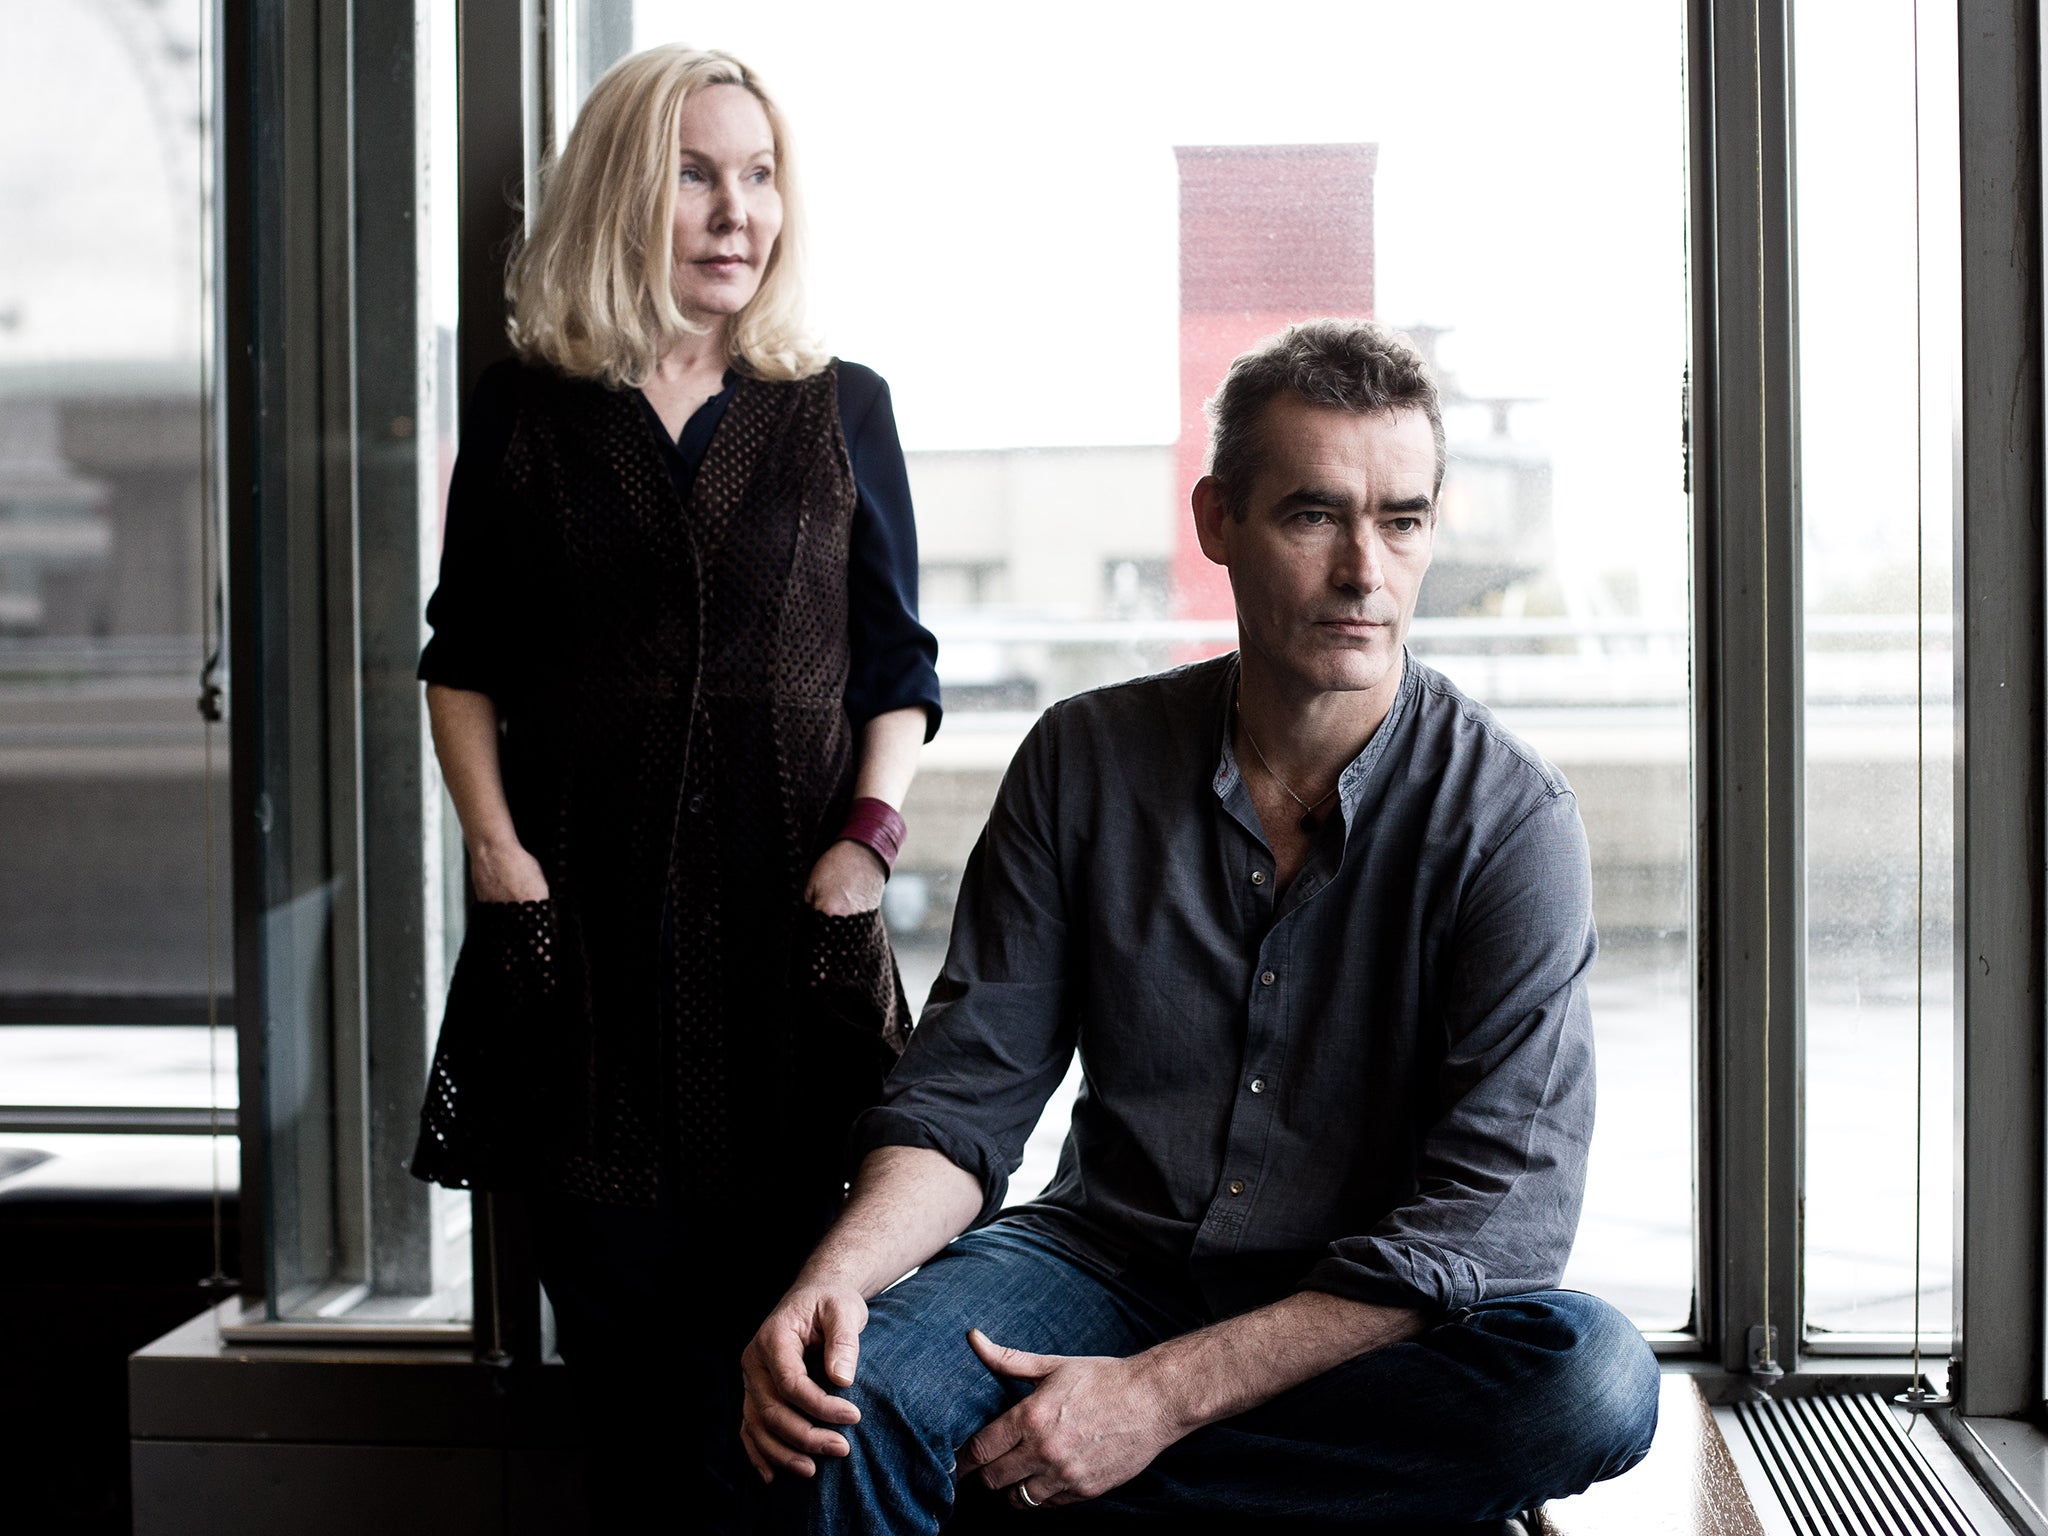 Rufus Norris and Katherine Boo. Norris, who will be artistic director of the National Theatre from April 2015, will direct a new stage adaptation of Booís acclaimed novel Behind The Beautiful Forevers: Life, Death And Hope In A Mumbai Undercity at the Nat